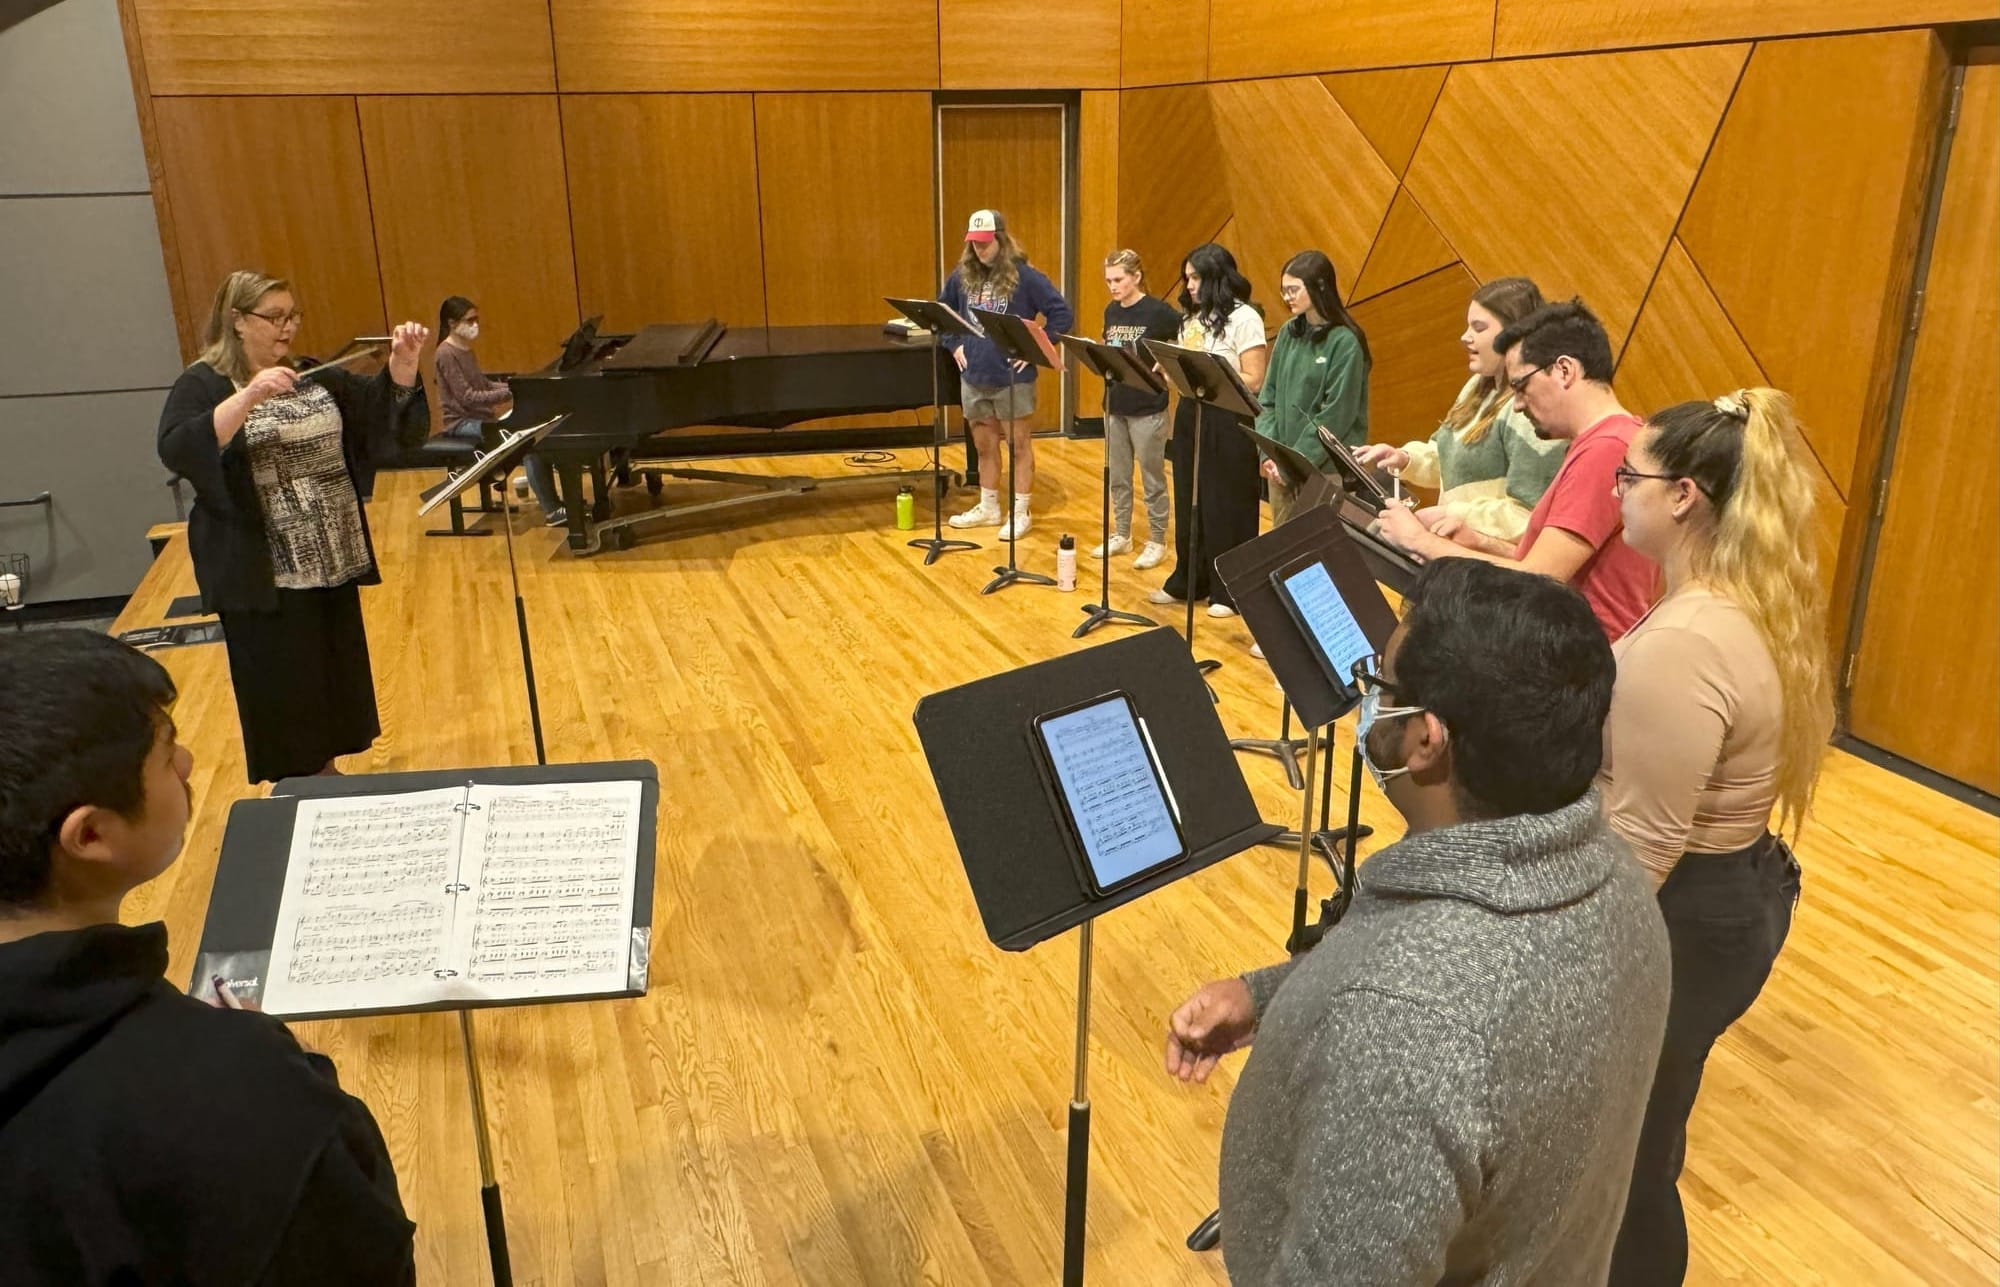 Students rehearse music on stage at the University of South Dakota